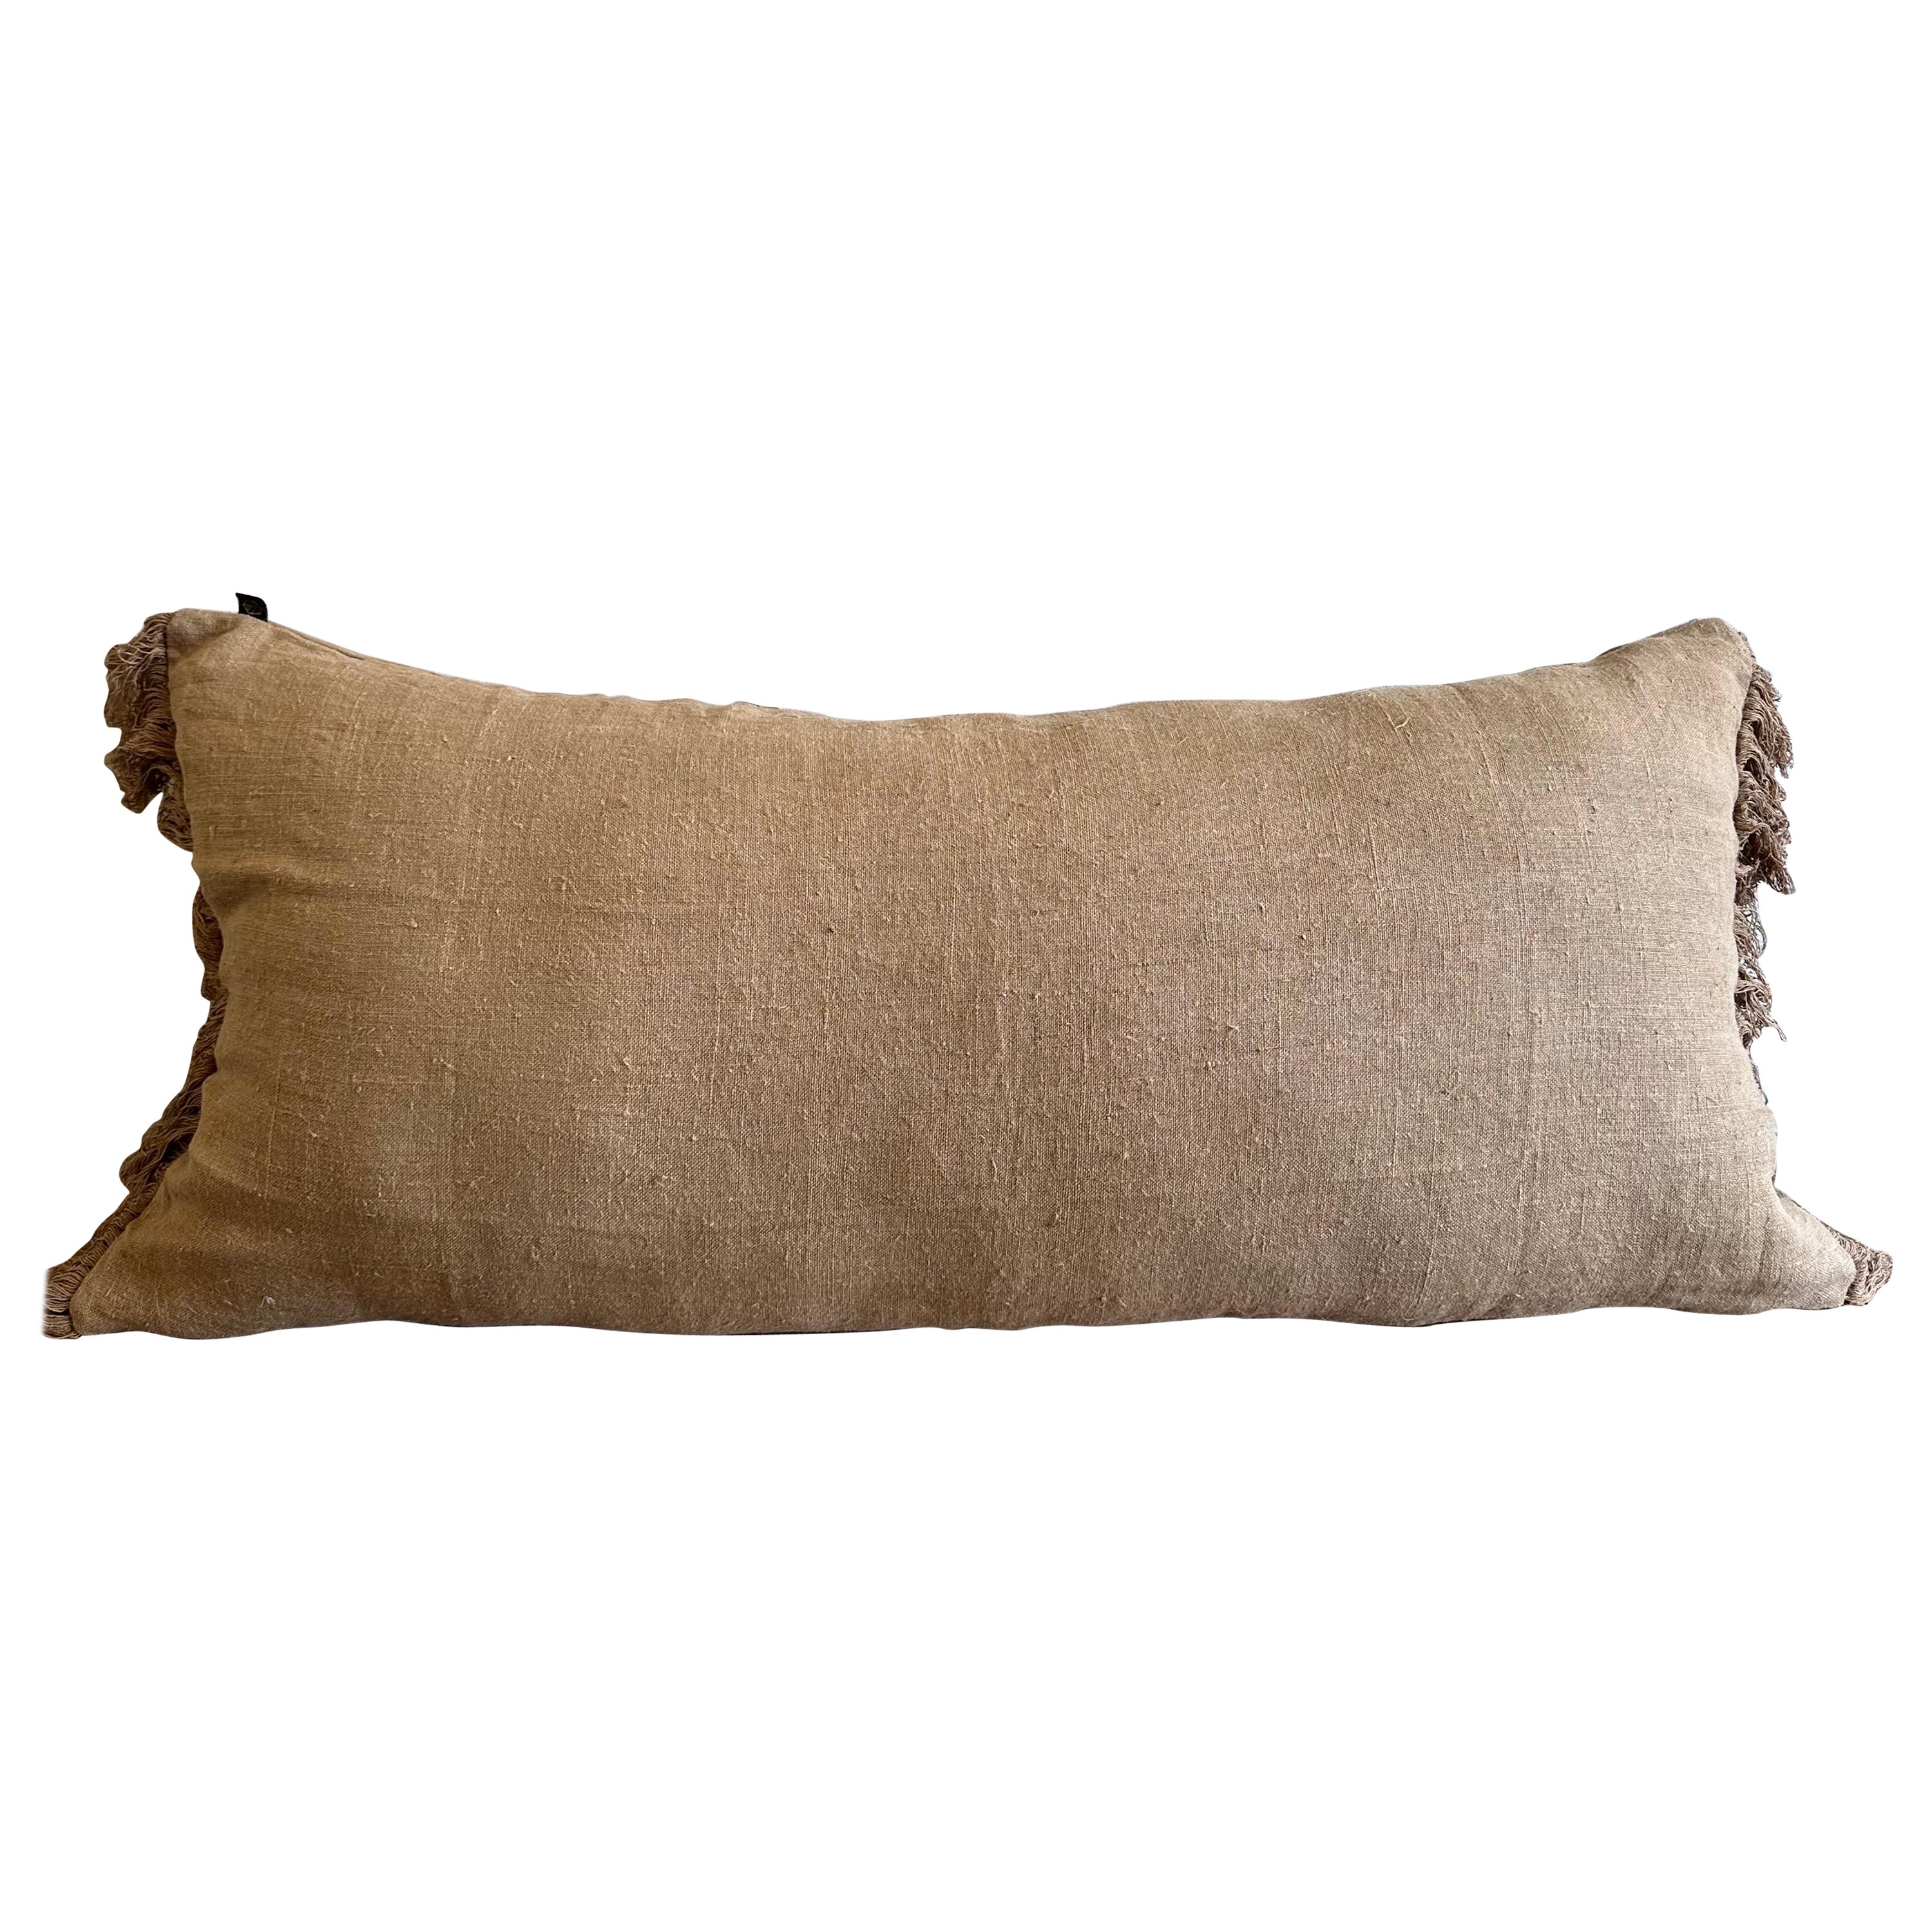 French XL King Size Lumbar Linen Pillow with Fringe Edges For Sale